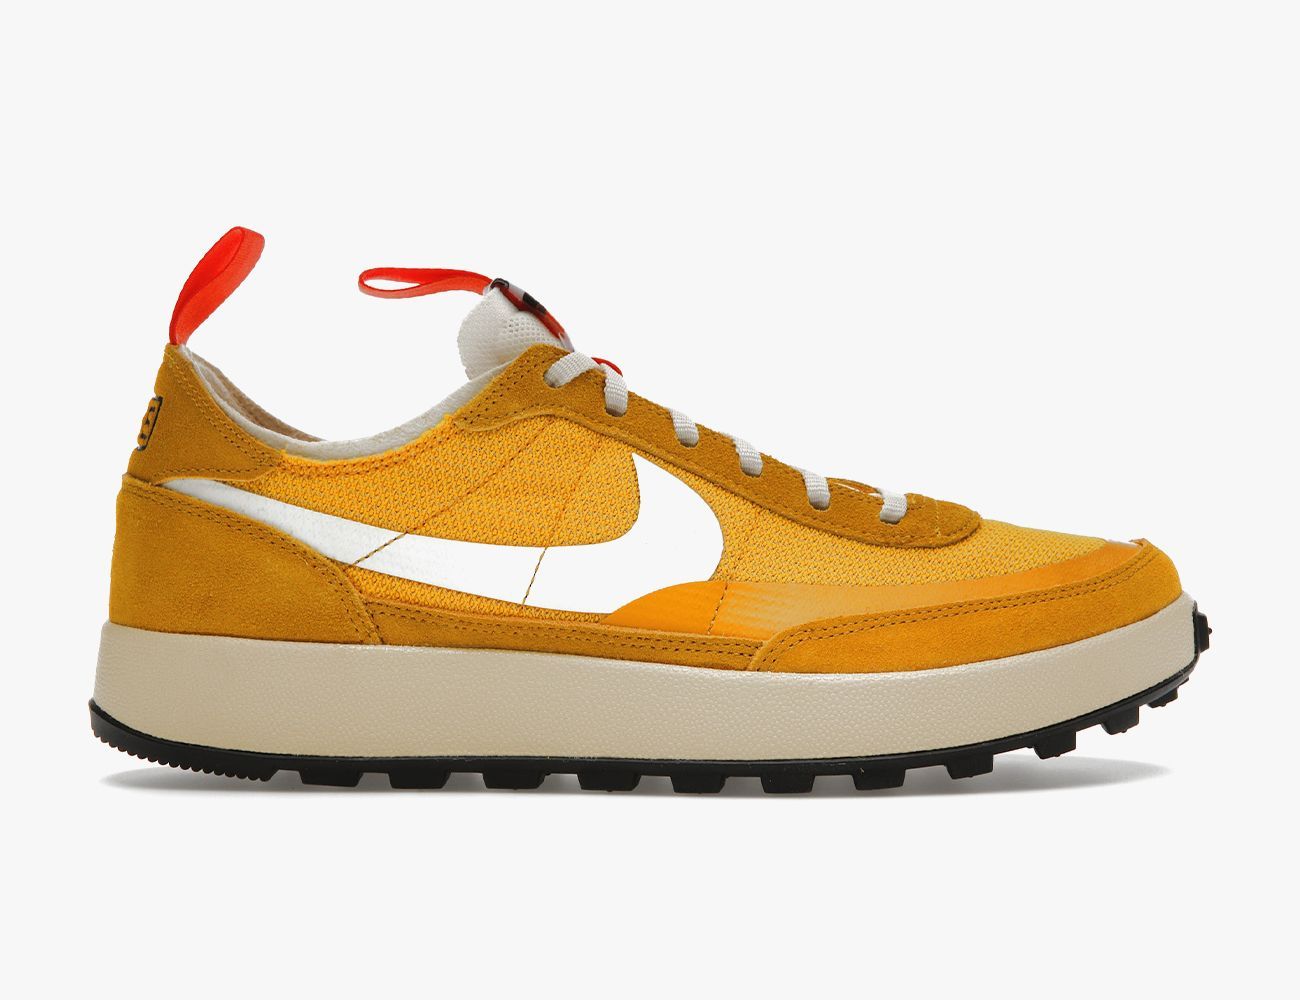 commentator Shinkan Sinis Nike x Tom Sachs General Purpose Shoe: Everything You Need to Know